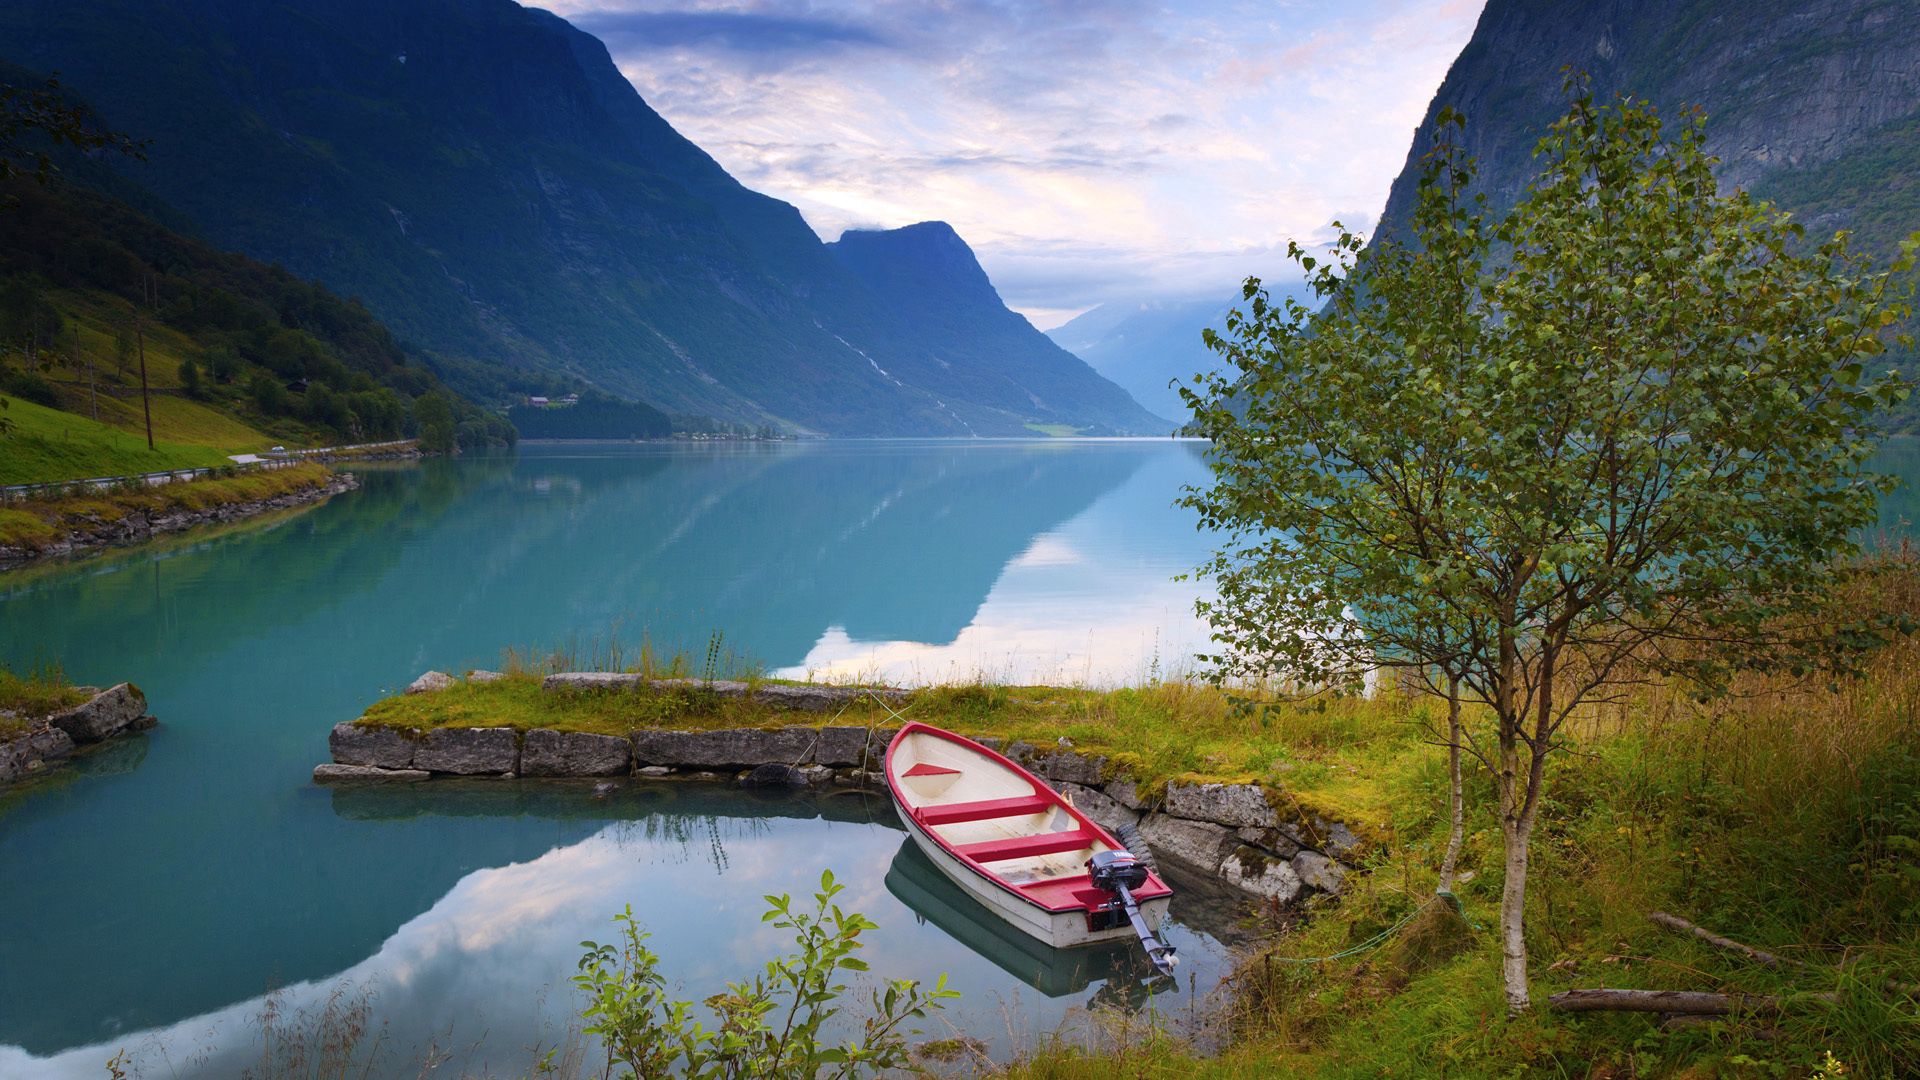 norway, lake, nature, grass, stones, mountains, shore, bank, boat, blue water Full HD